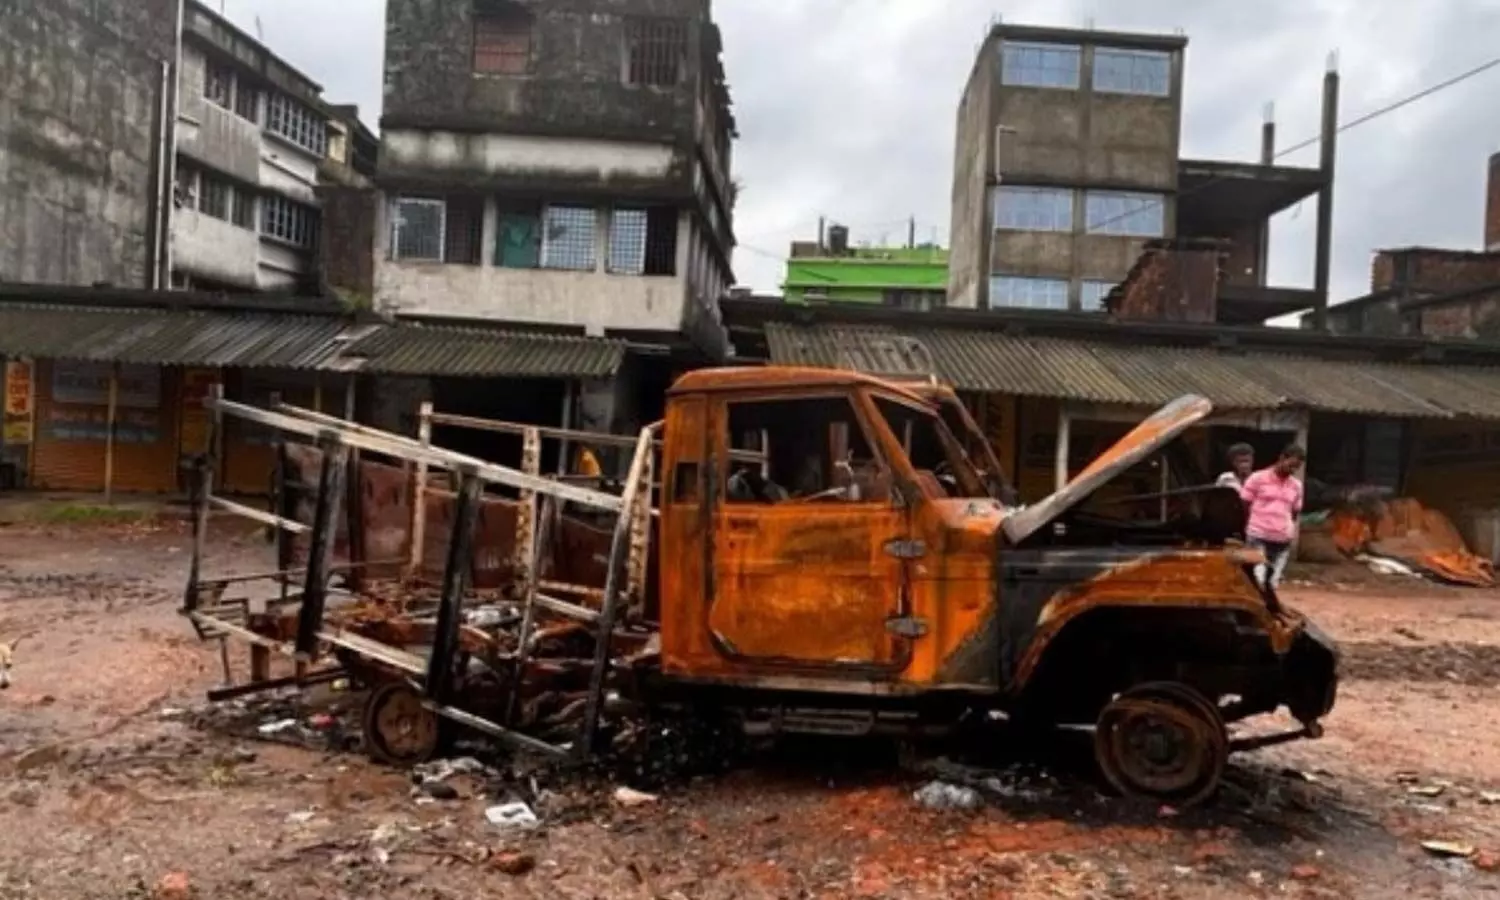 Signs of Violence and Arson: Charred Vehicles Abandoned Near Bhangar II BDOs Office